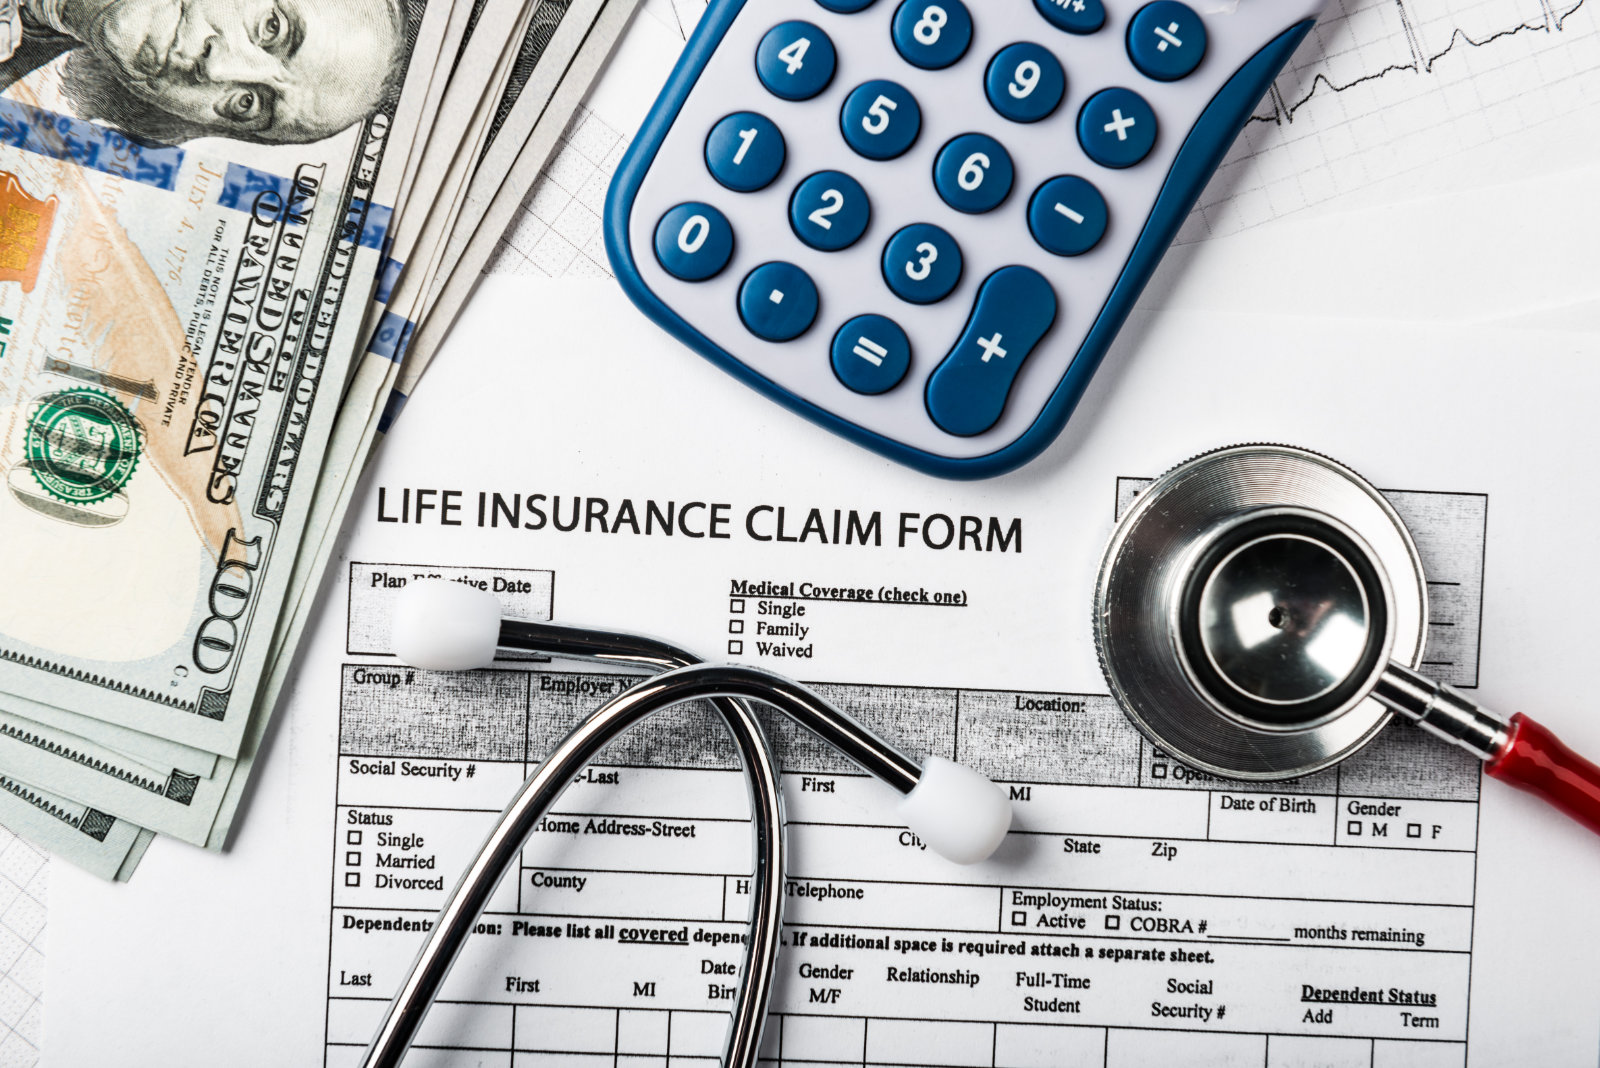 Types Of Life Insurance: Which One Do You Need?